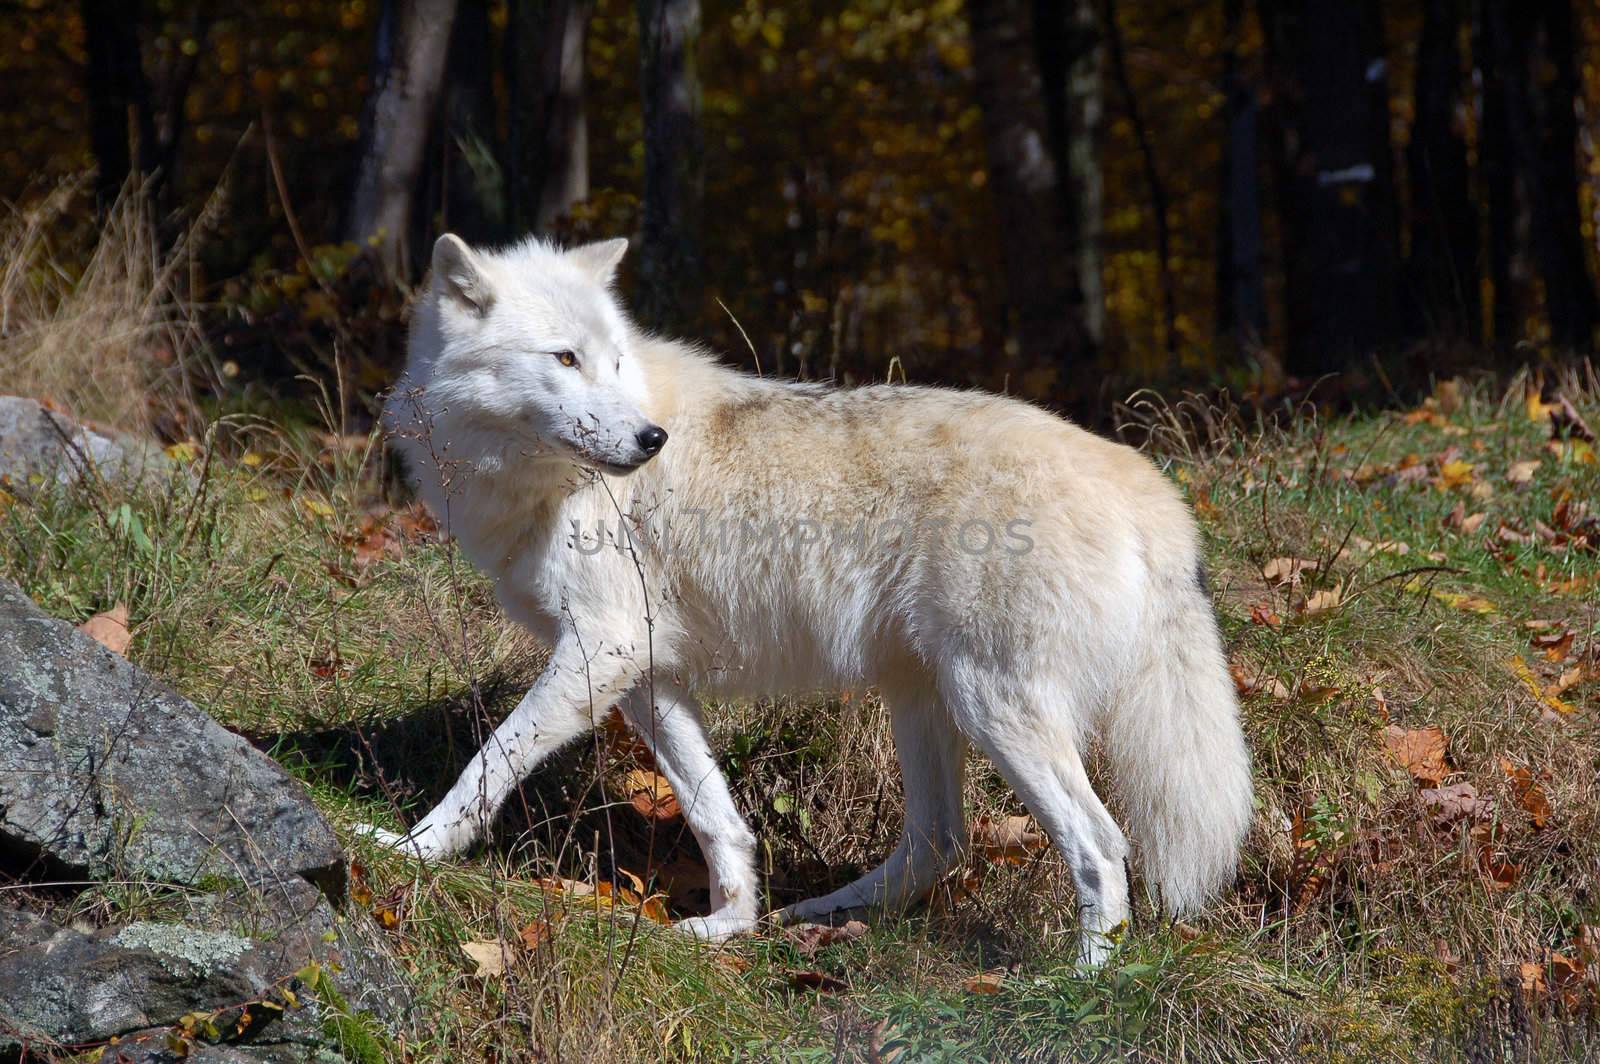 Arctic wolf in a majestic forest in autumn